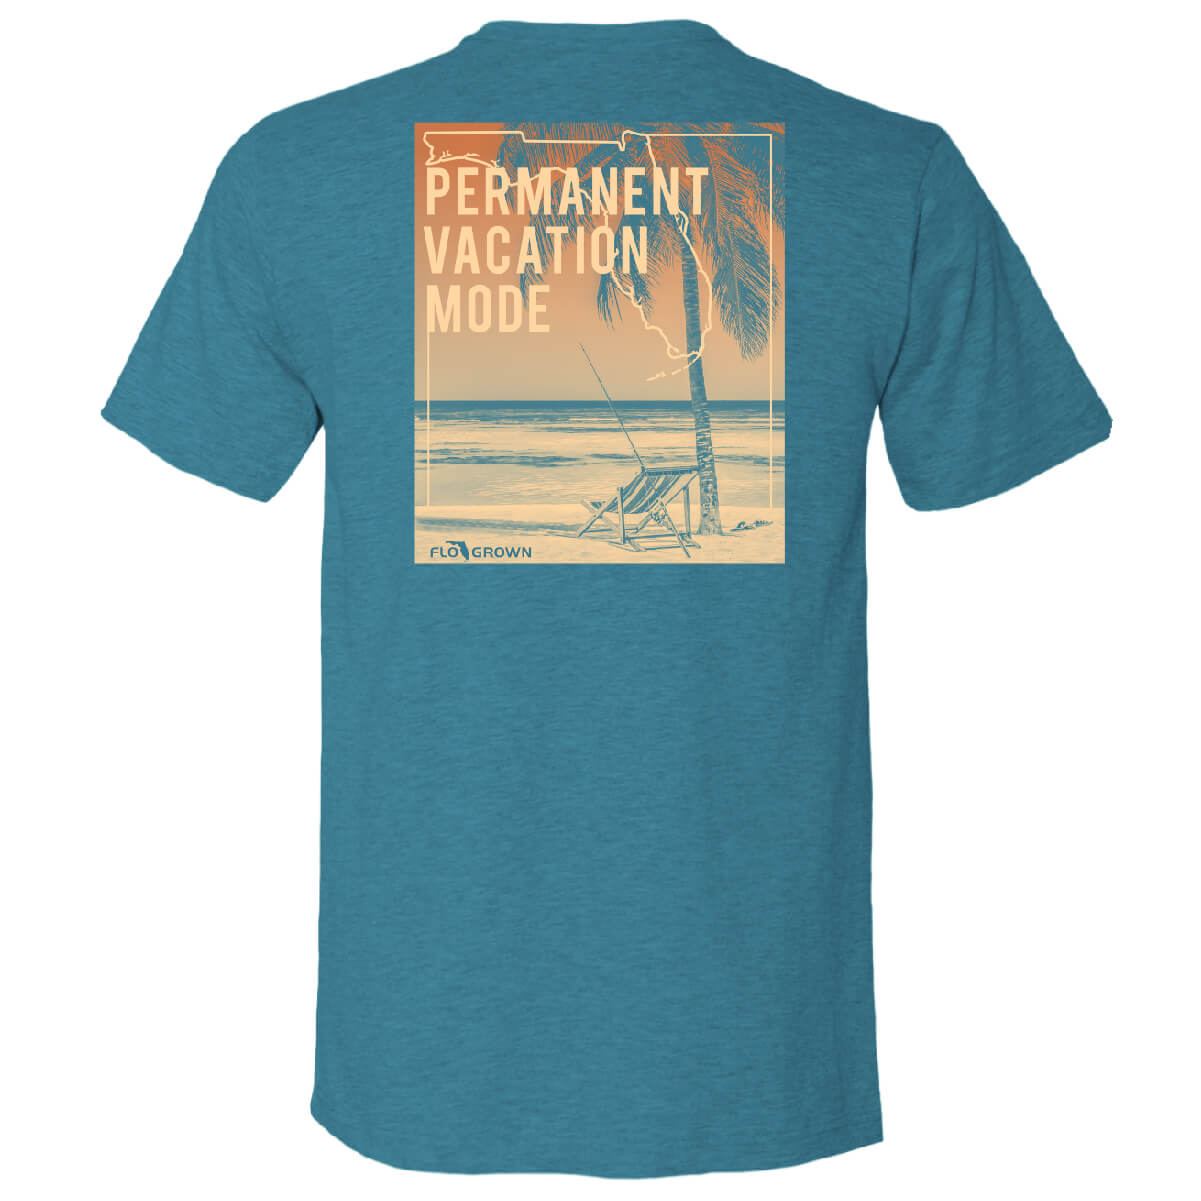 Permanent Vacation Mode Tee - Back